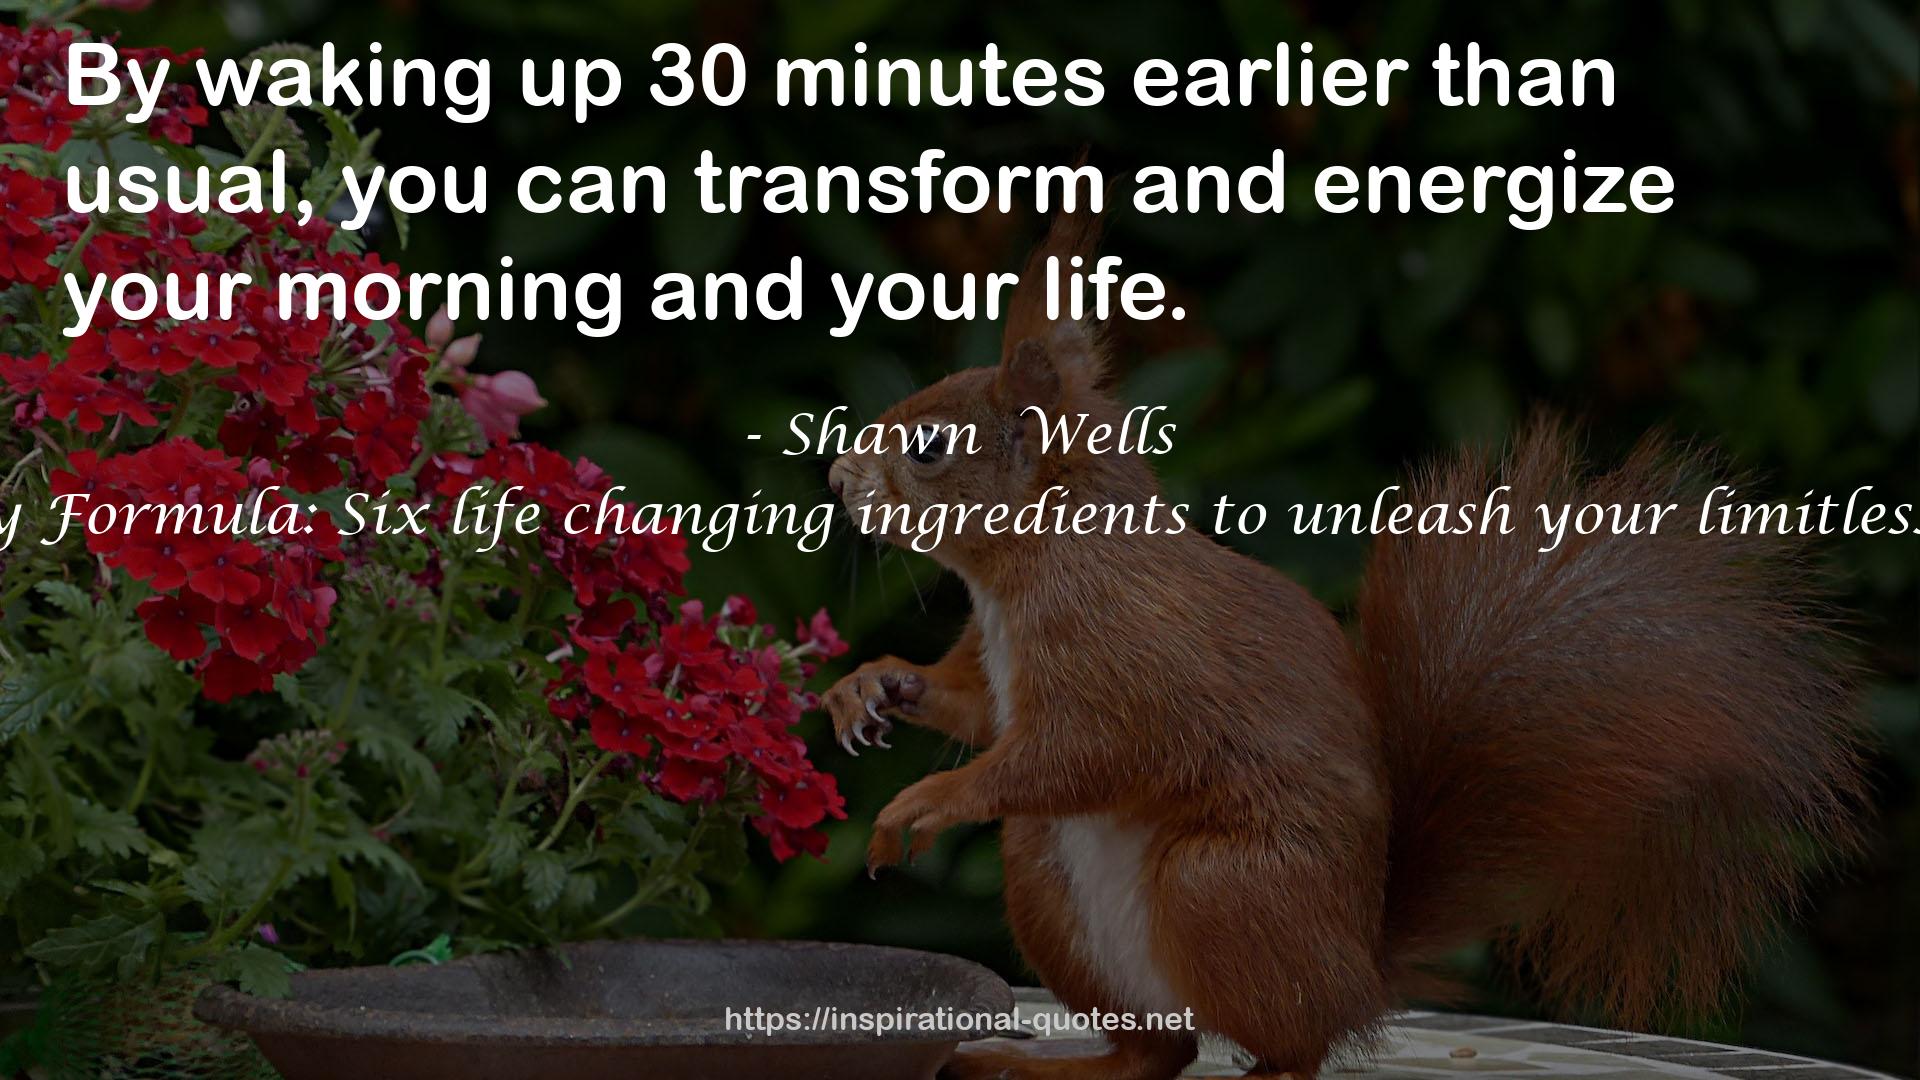 The Energy Formula: Six life changing ingredients to unleash your limitless potential QUOTES